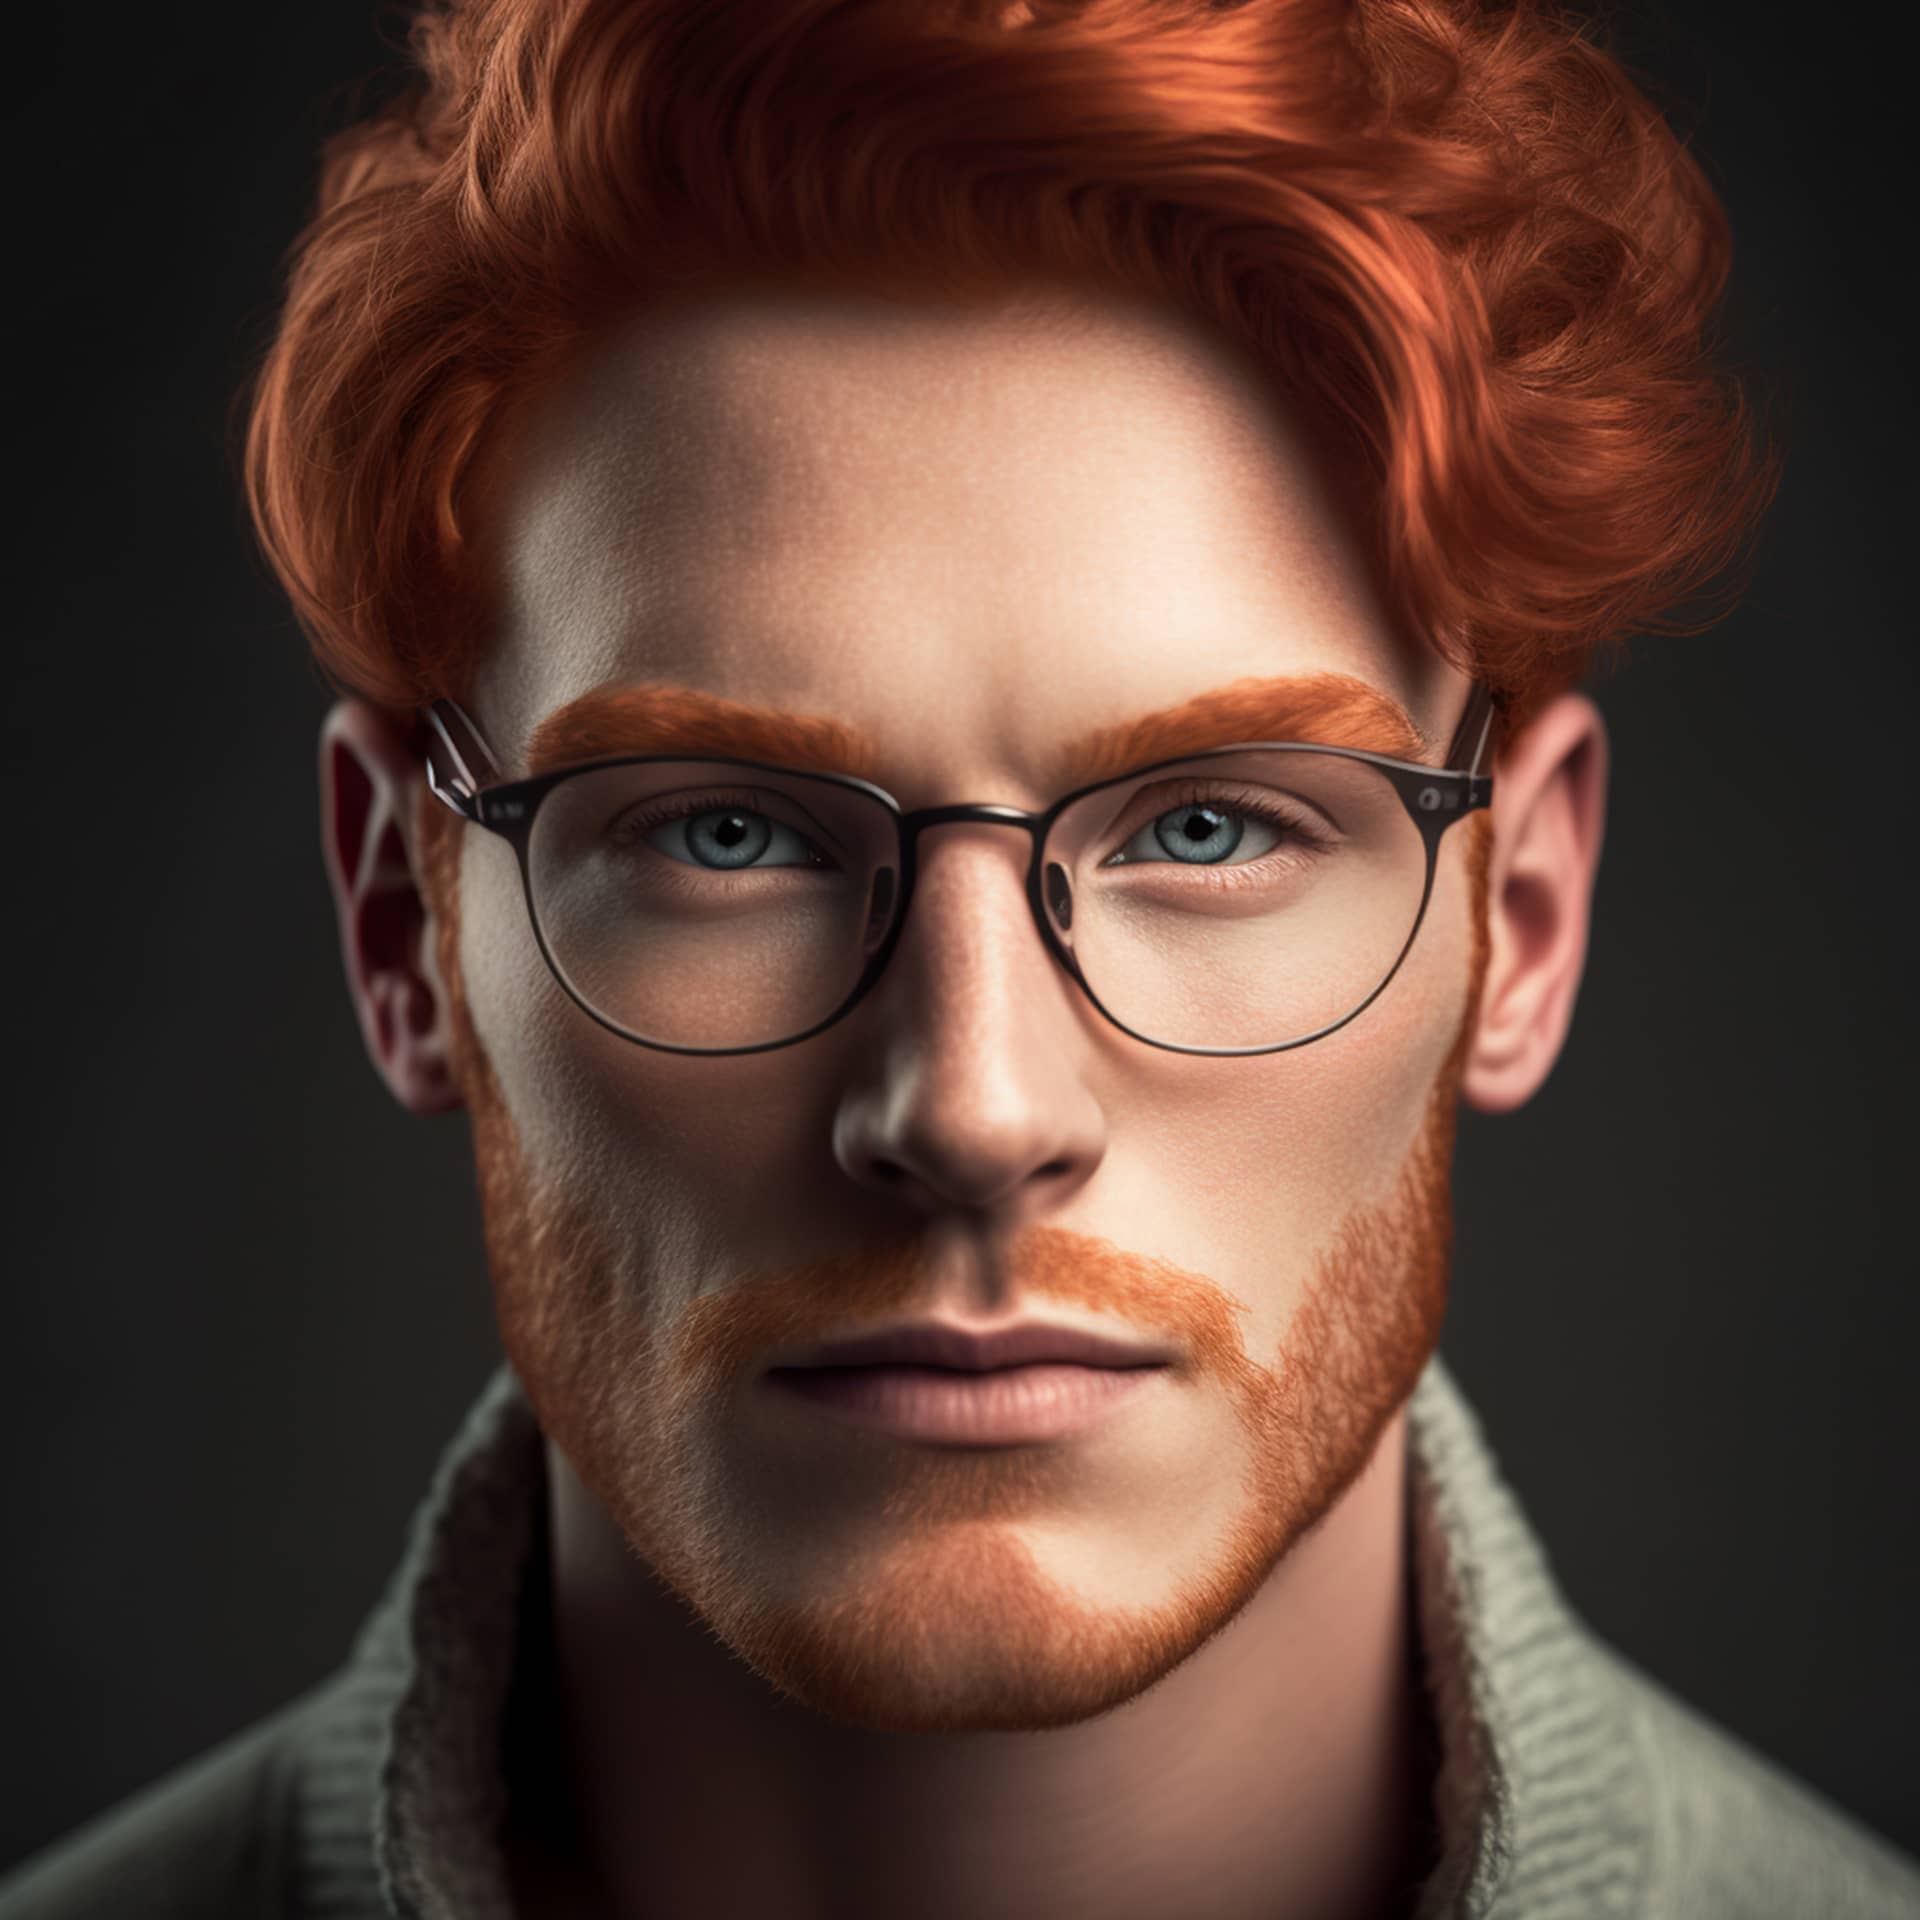 Male pictures for fake profile young red haired man glasses close up